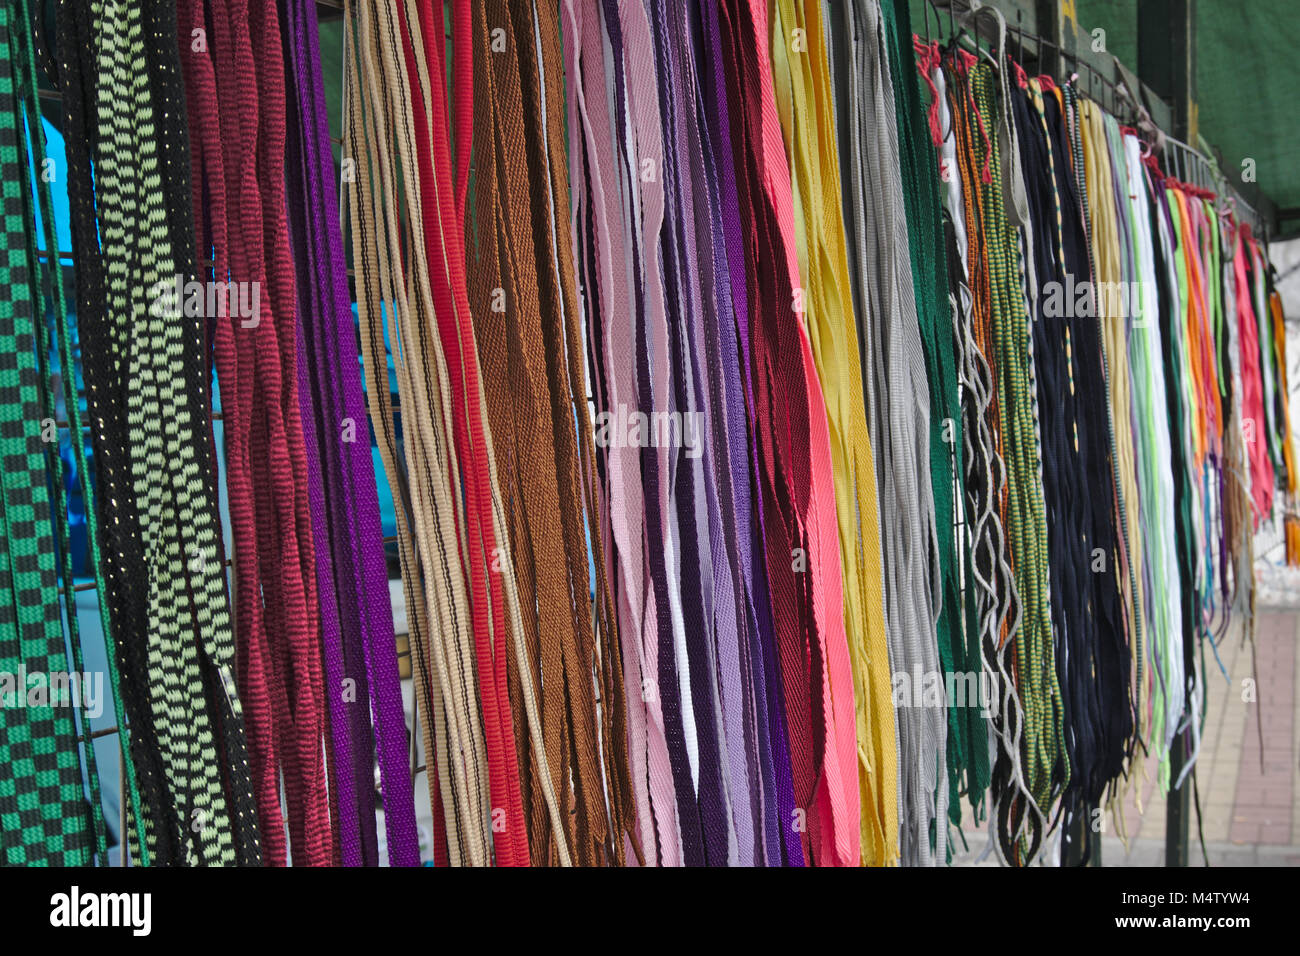 A colorful group of shoelaces hanging in a market stall. Stock Photo